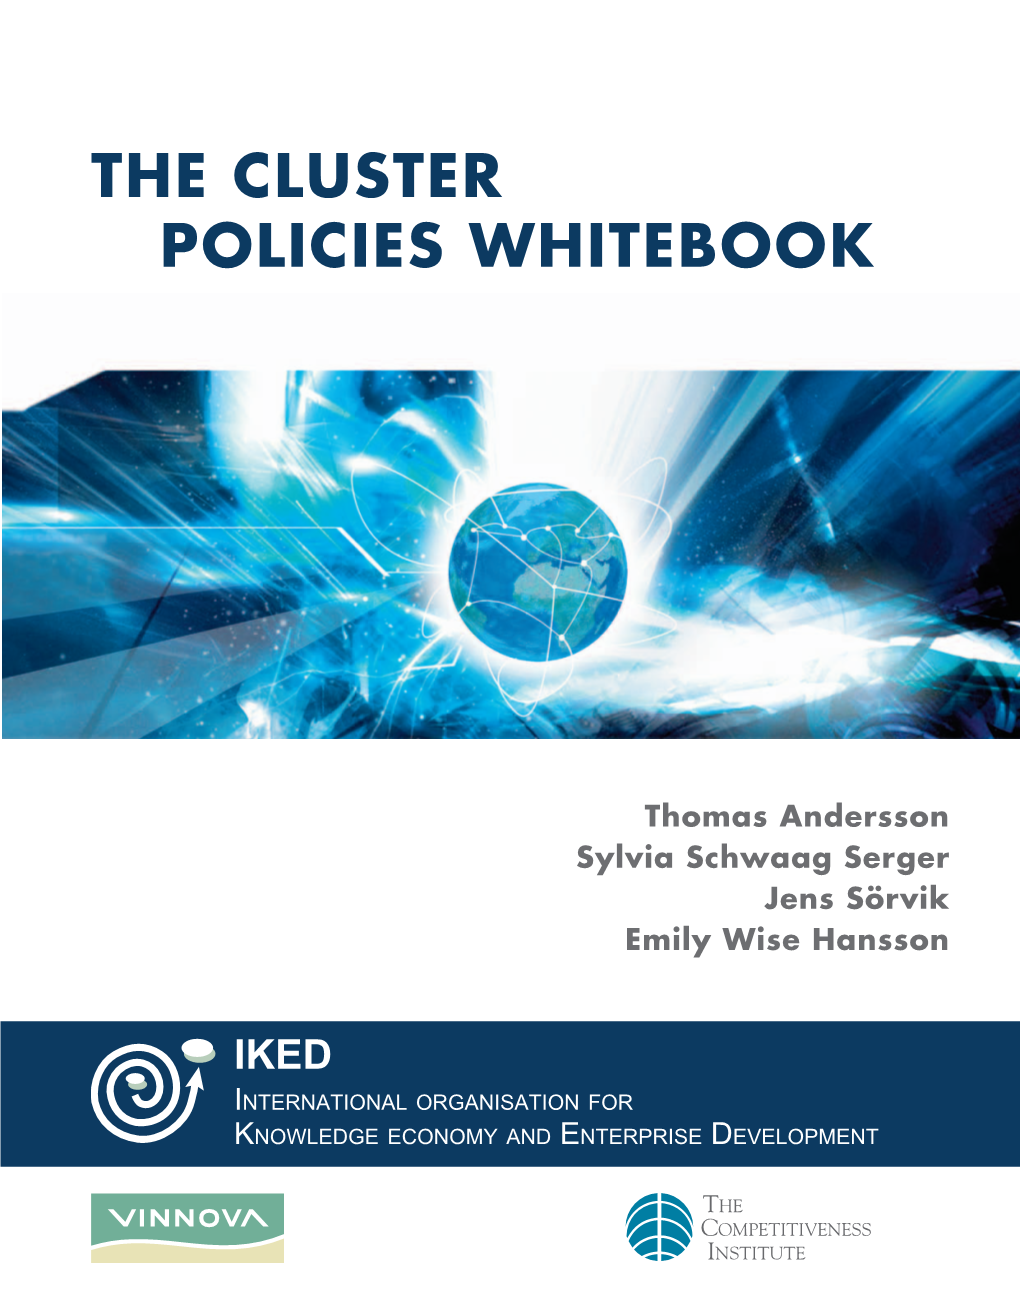 The Cluster Policies Whitebook the Cluster Policies Whitebook